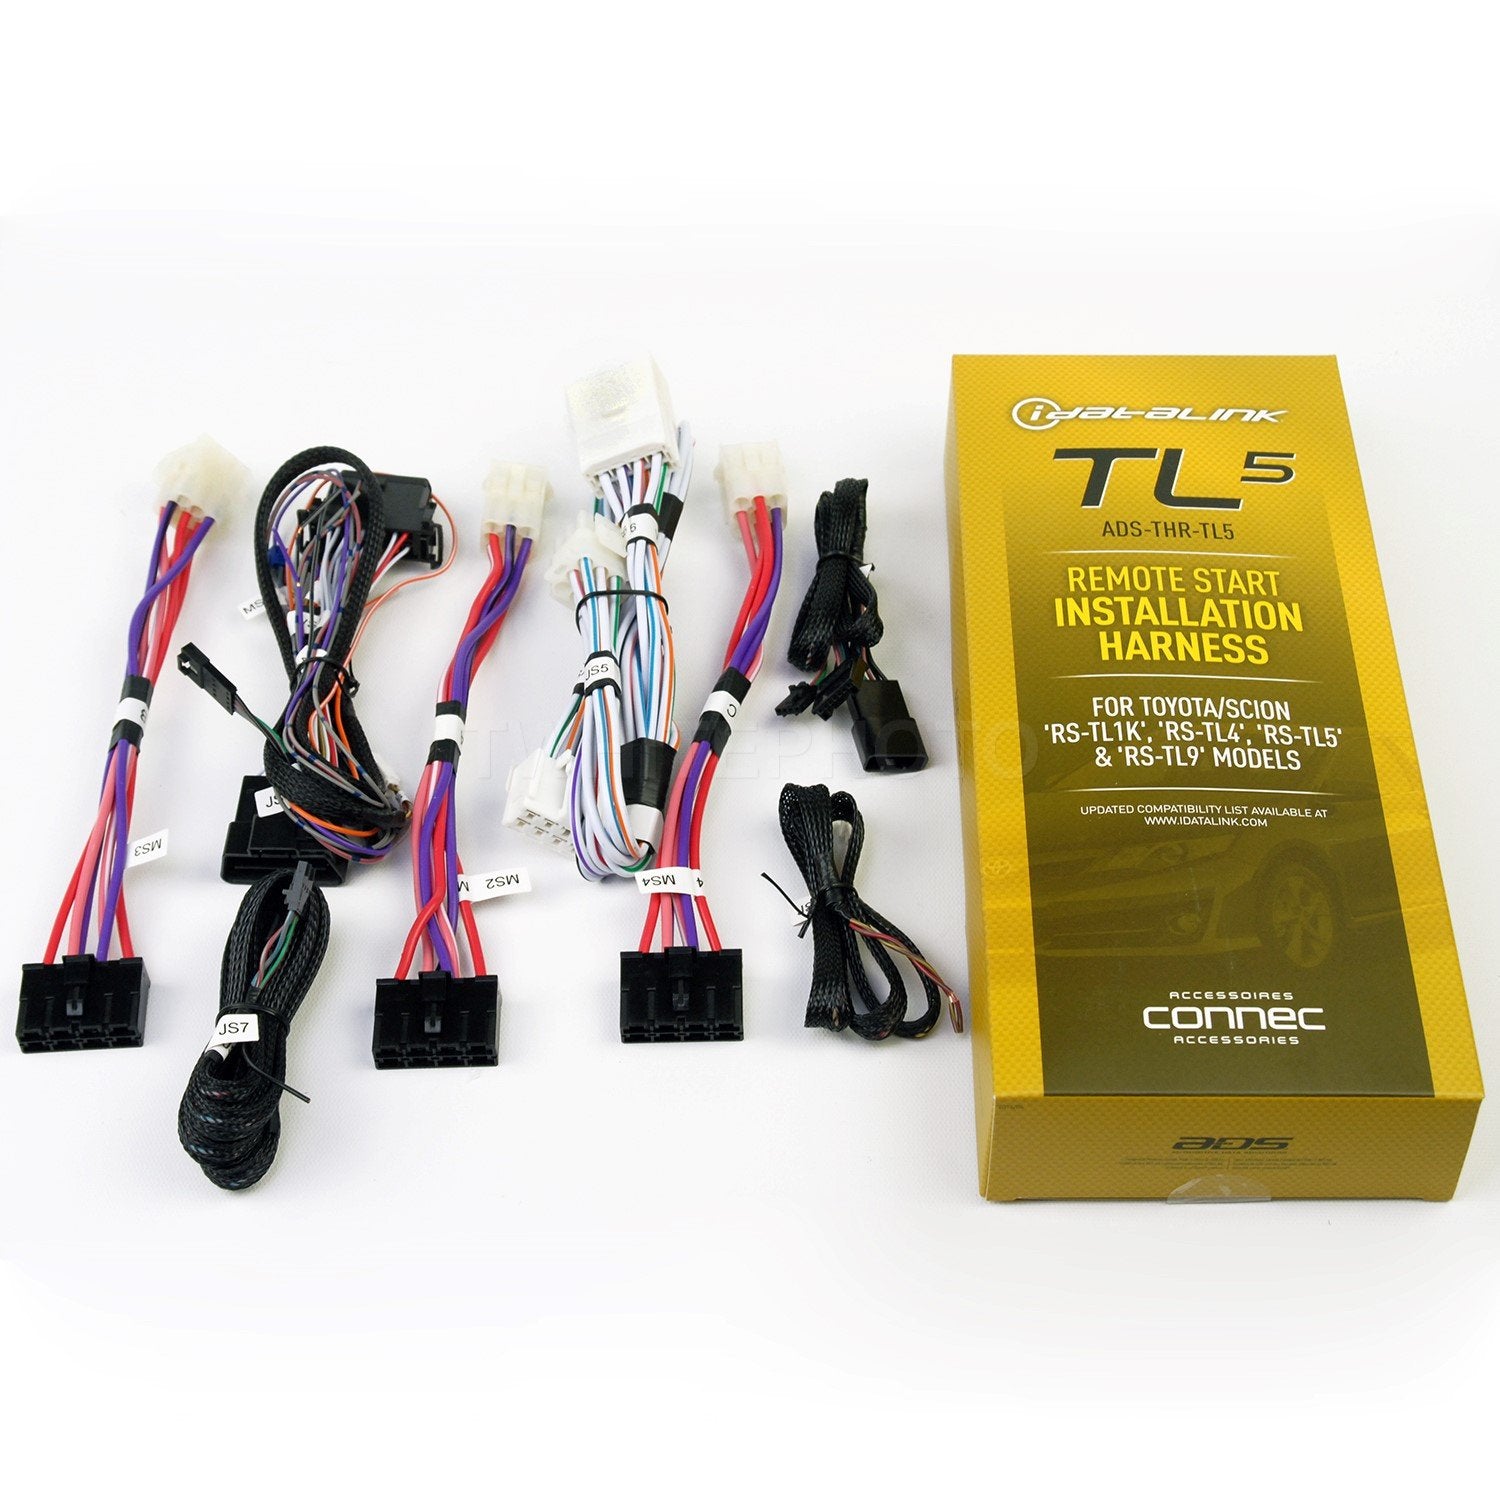 iDatastart ADS-THR-TL5 Remote Start T-harness fits Select 2010-up Toyota and Scion Vehicles with Standard Ignition (CMHCXA0 module also required)